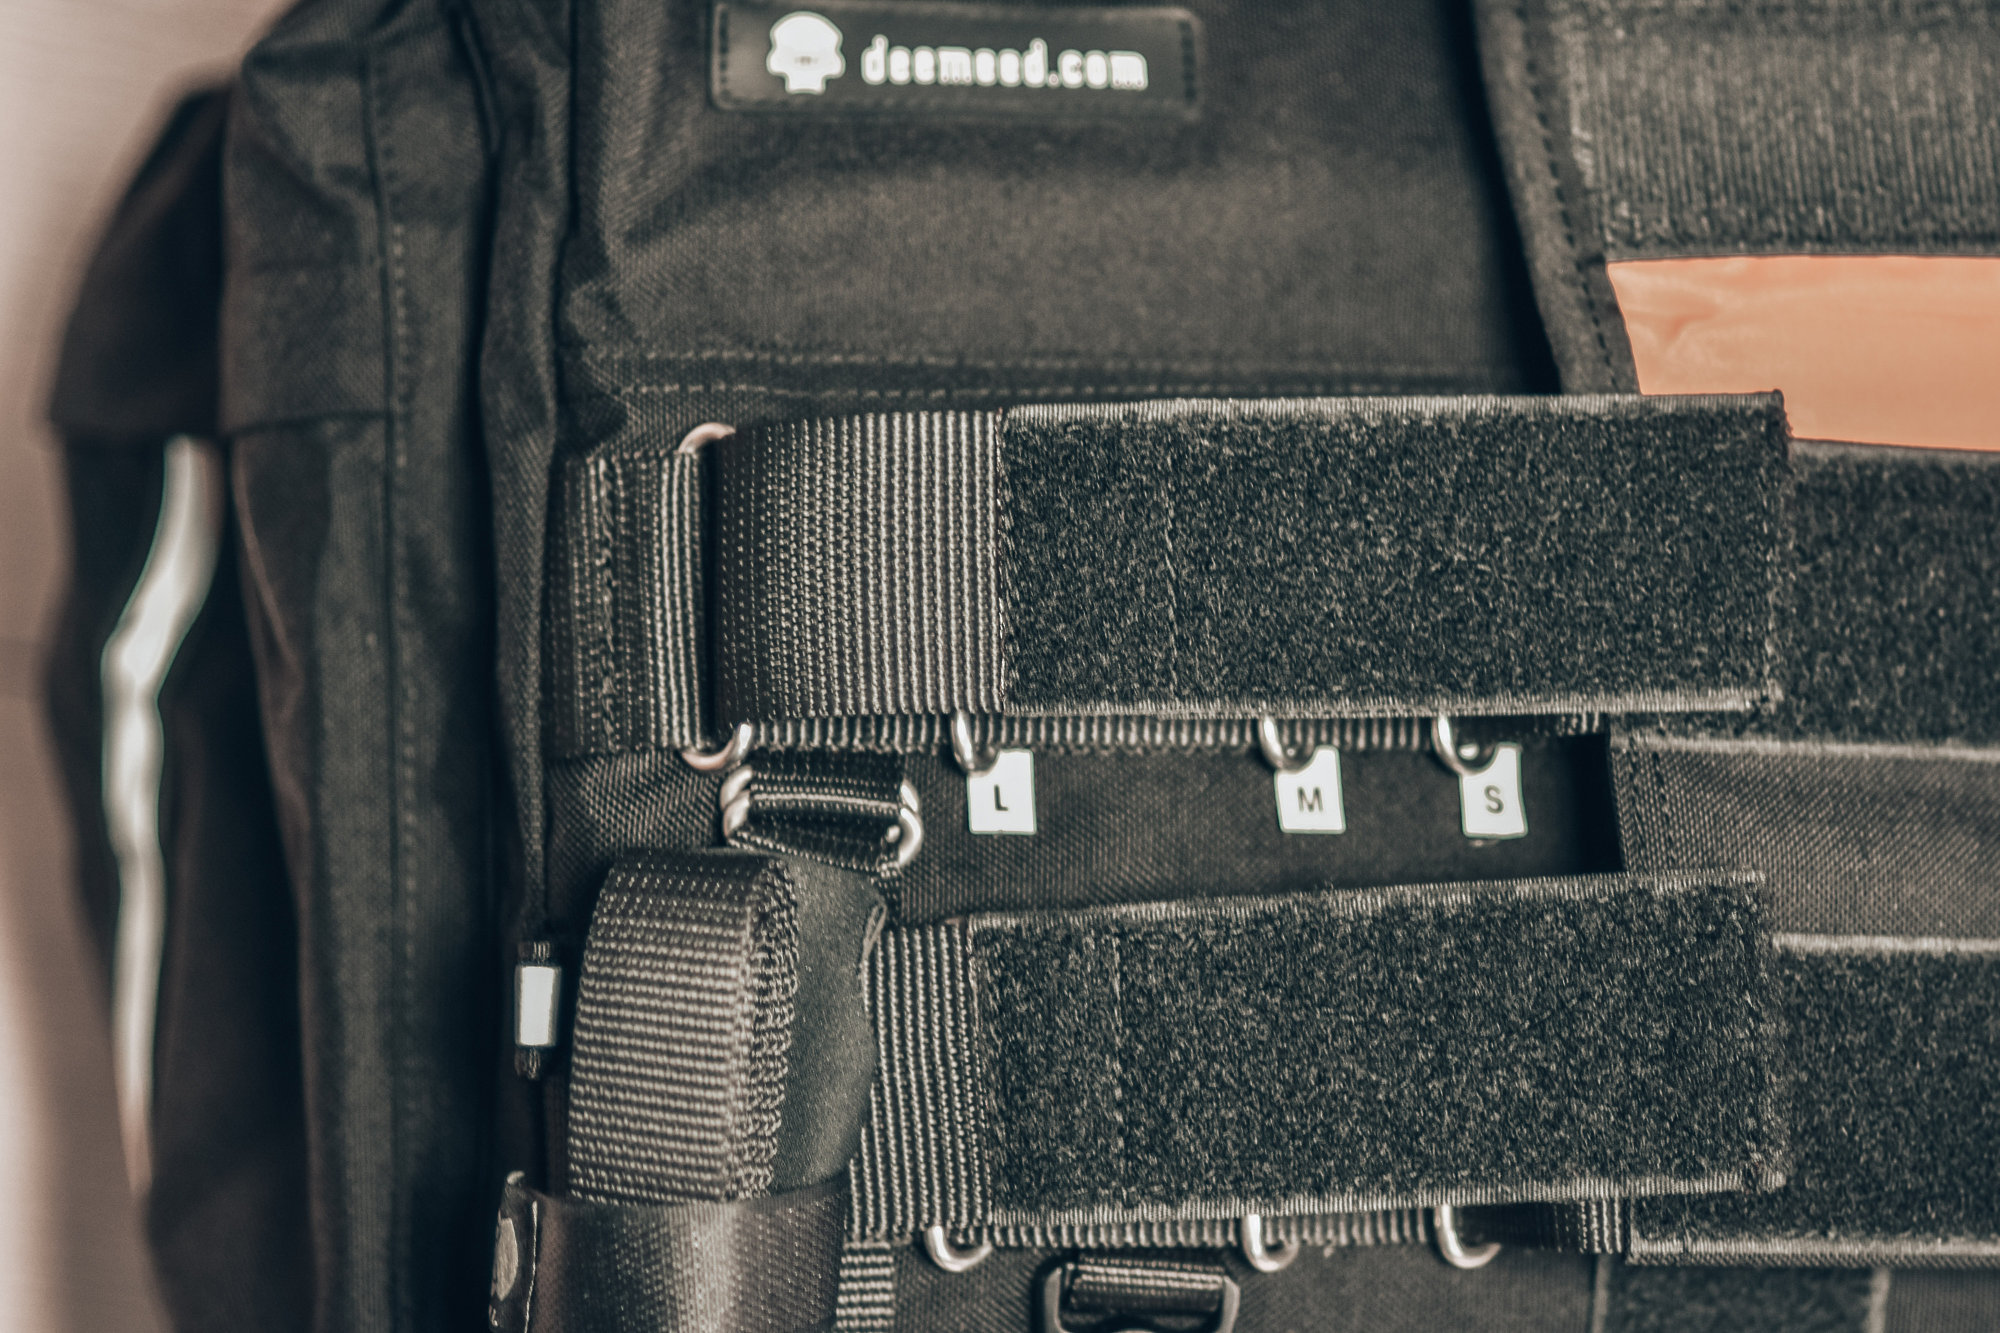 How to adjust the universal system in DEEMEED bags? - DeemeeD